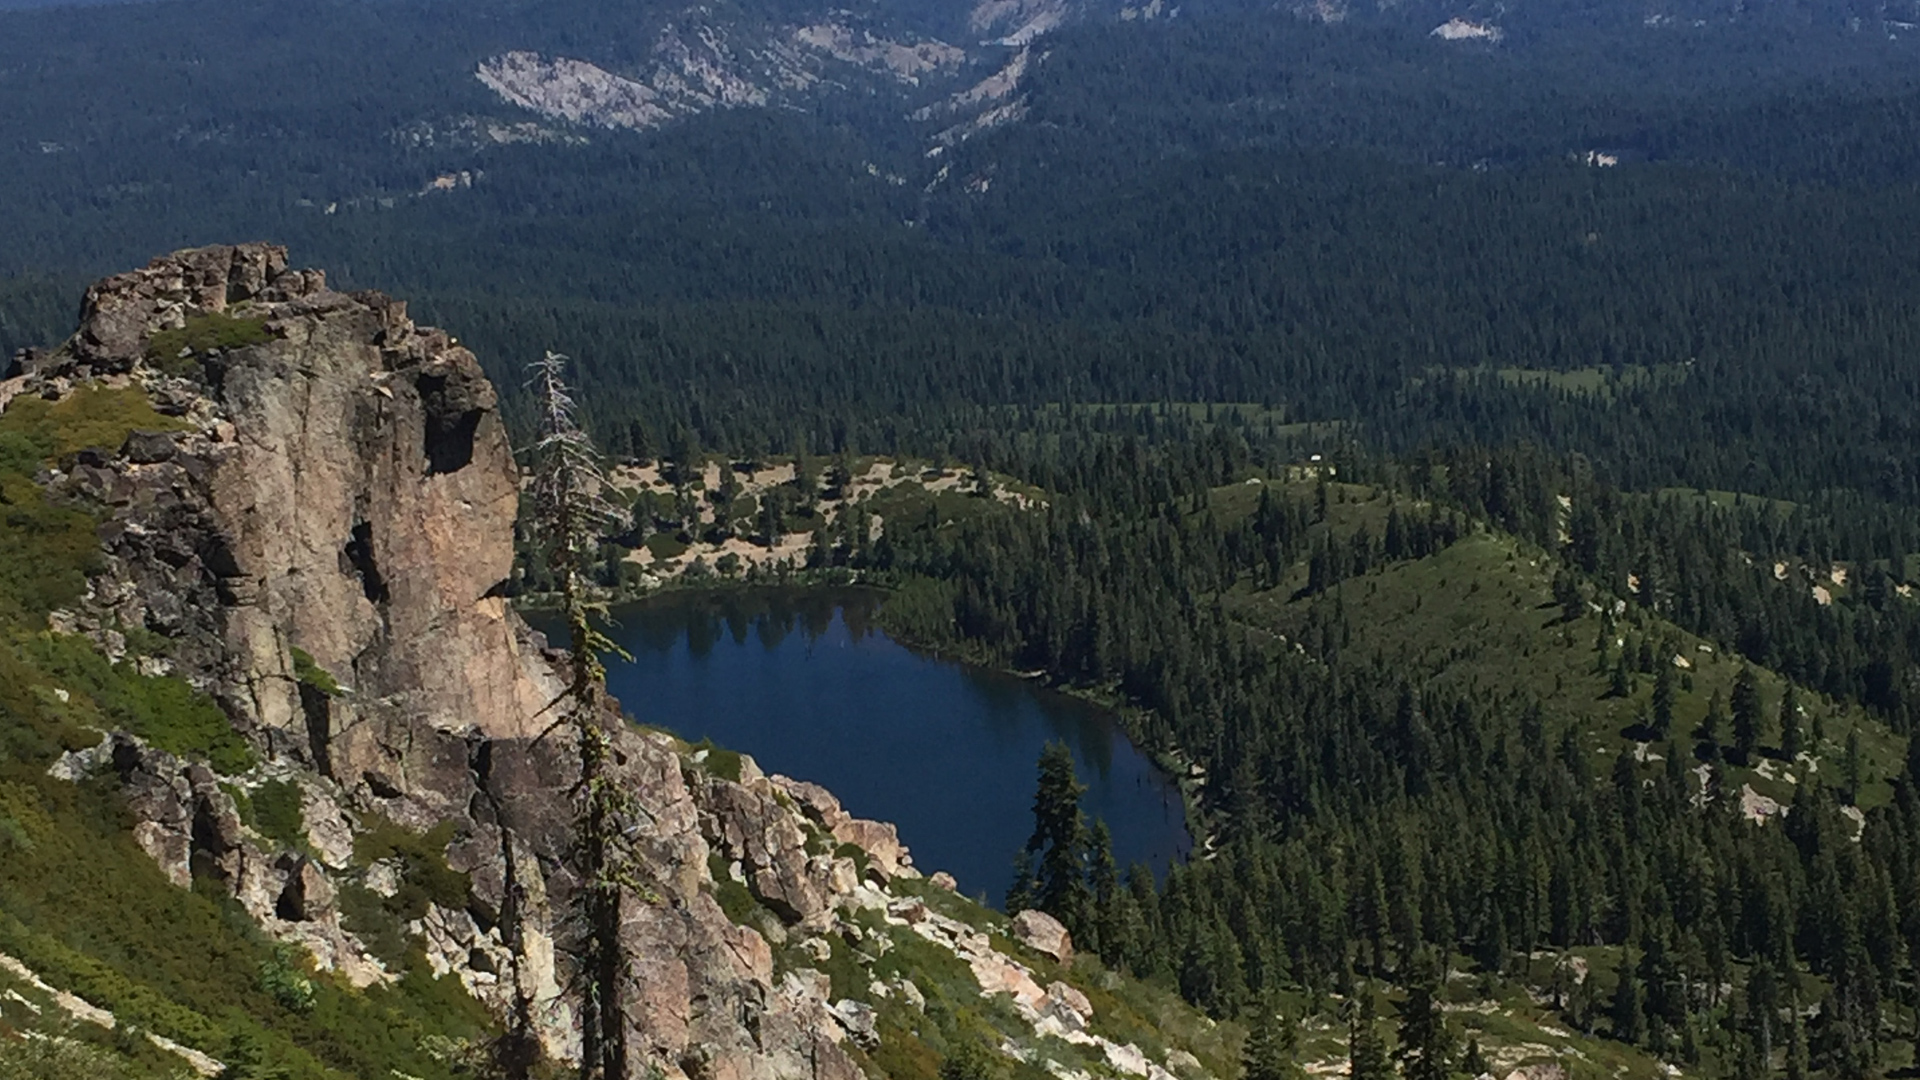 5 great hikes in the Lost Sierra (Sponsored) - SFGate